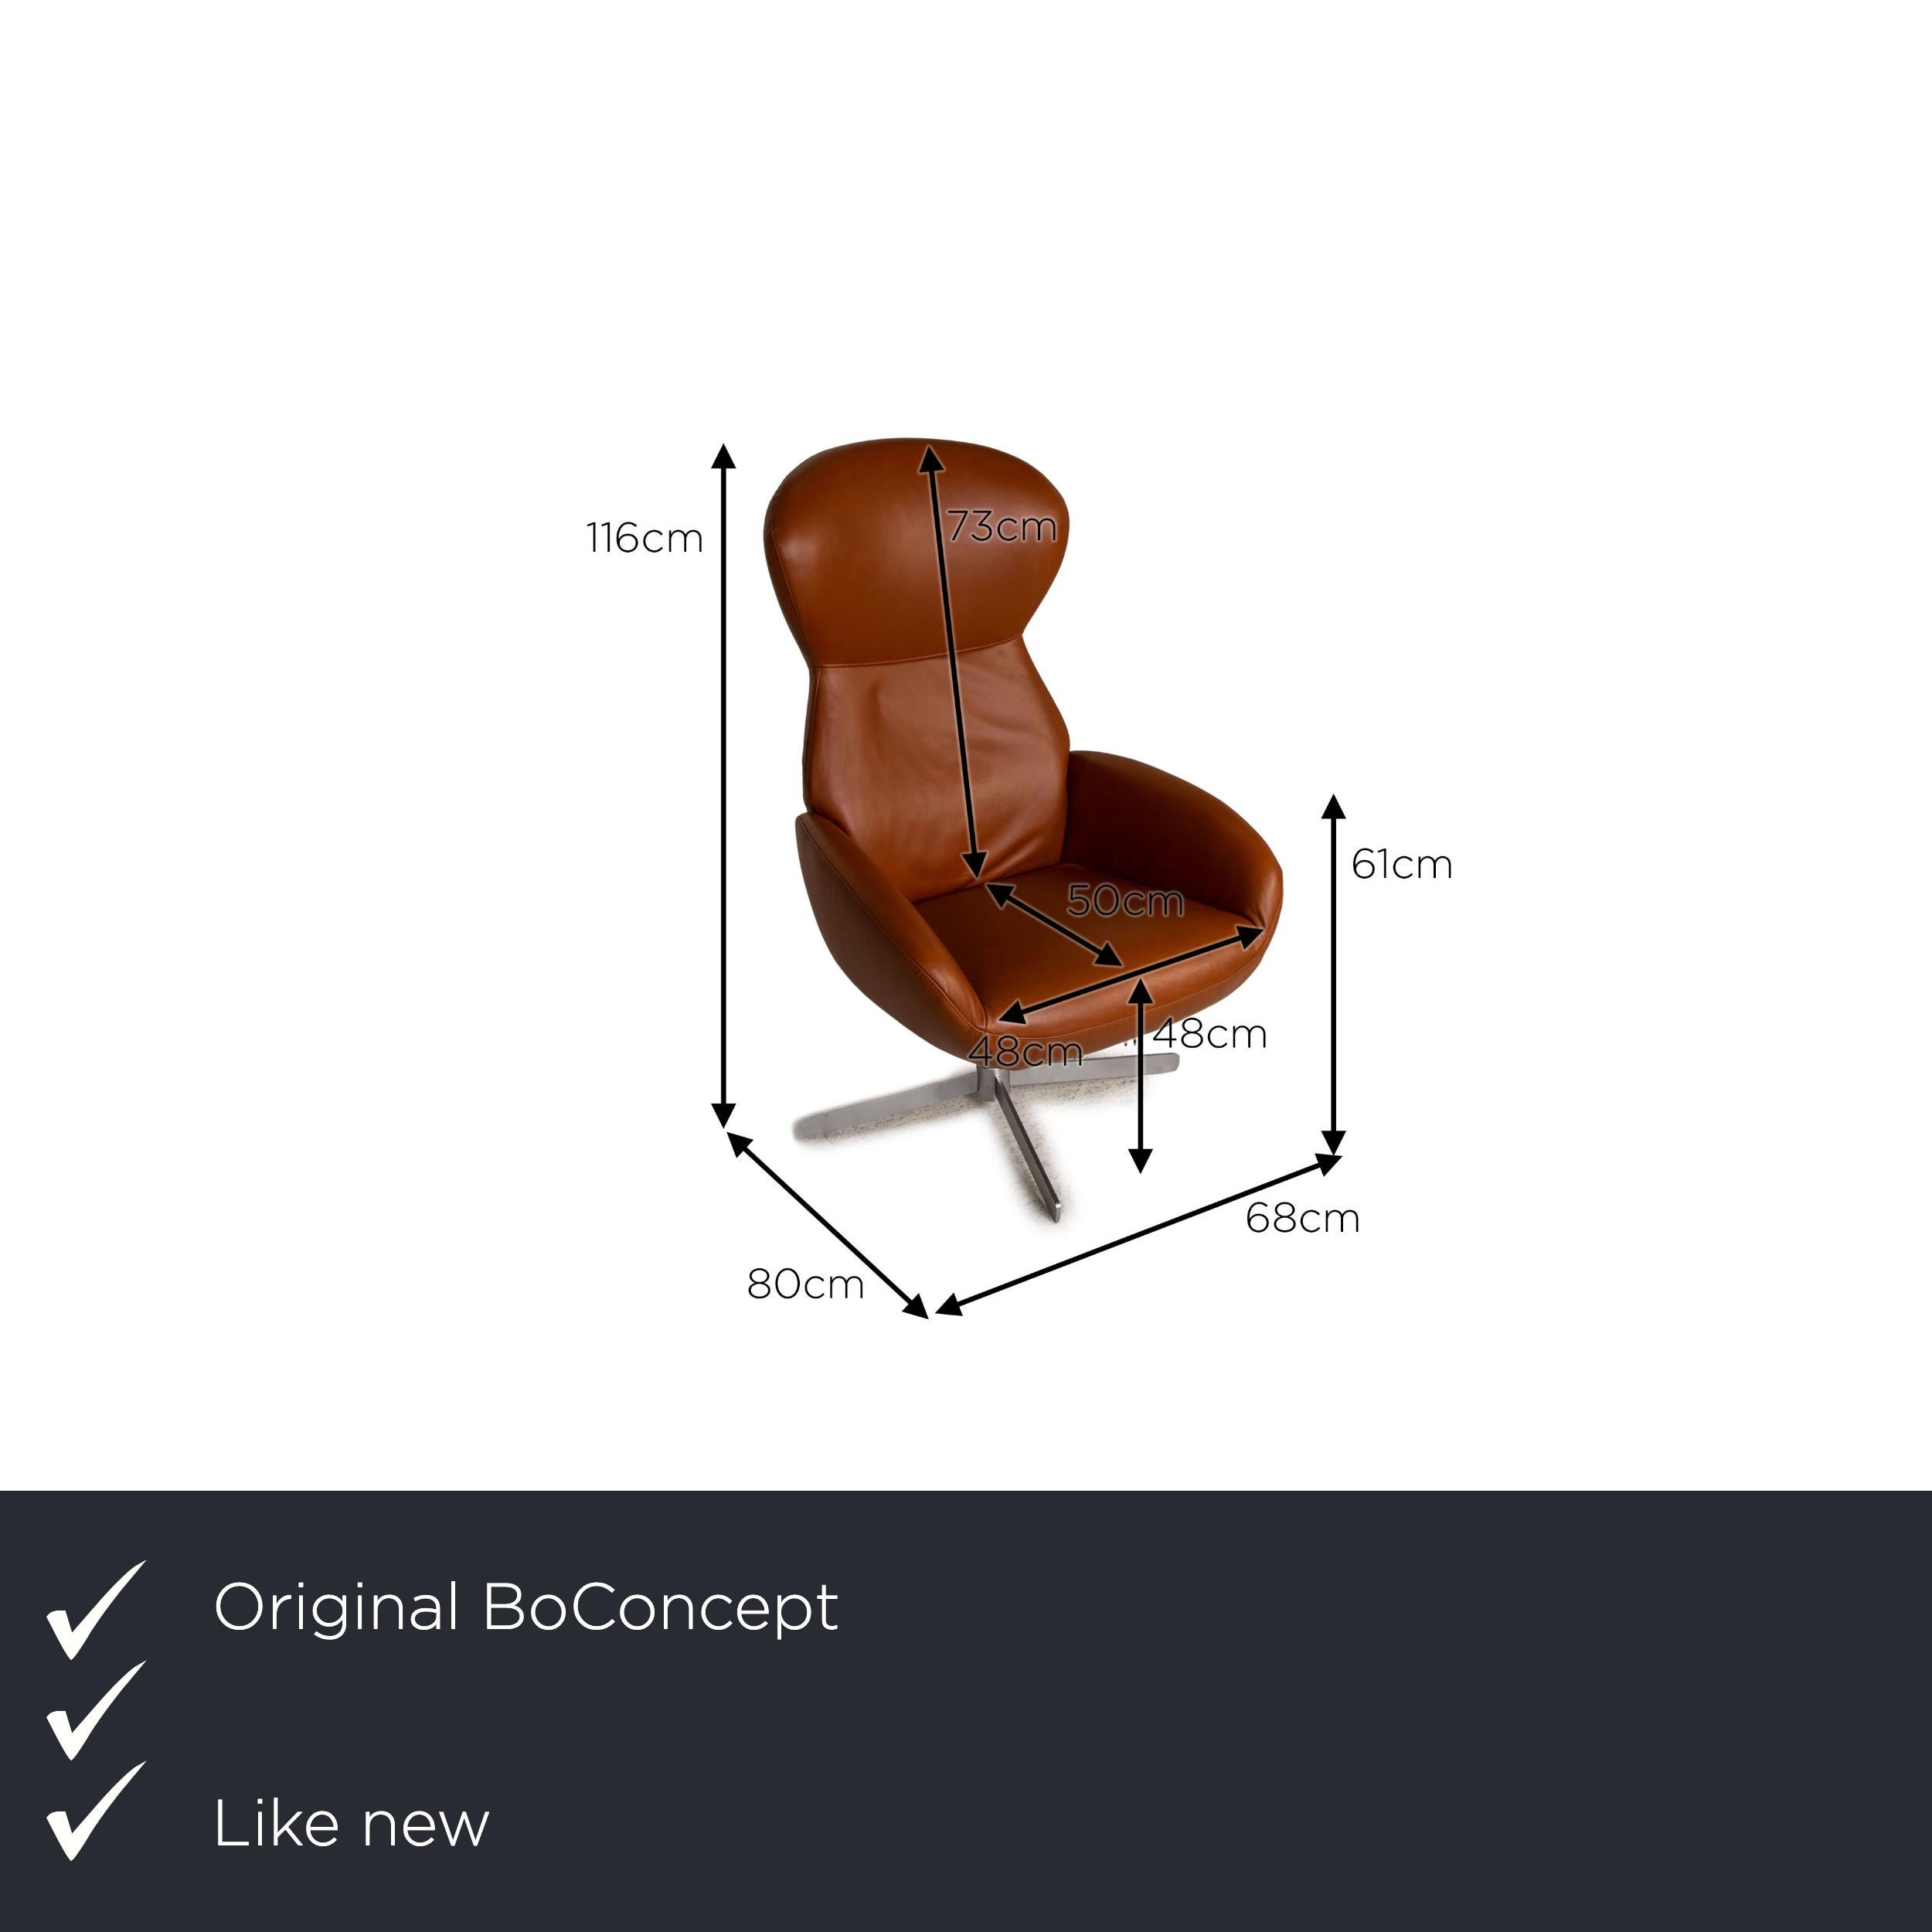 We present to you a BoConcept Athena Relax leather armchair brown incl. stool.

Product measurements in centimeters:

depth: 80
width: 68
height: 116
seat height: 48
rest height: 61
seat depth: 50
seat width: 48
back height: 73.


 